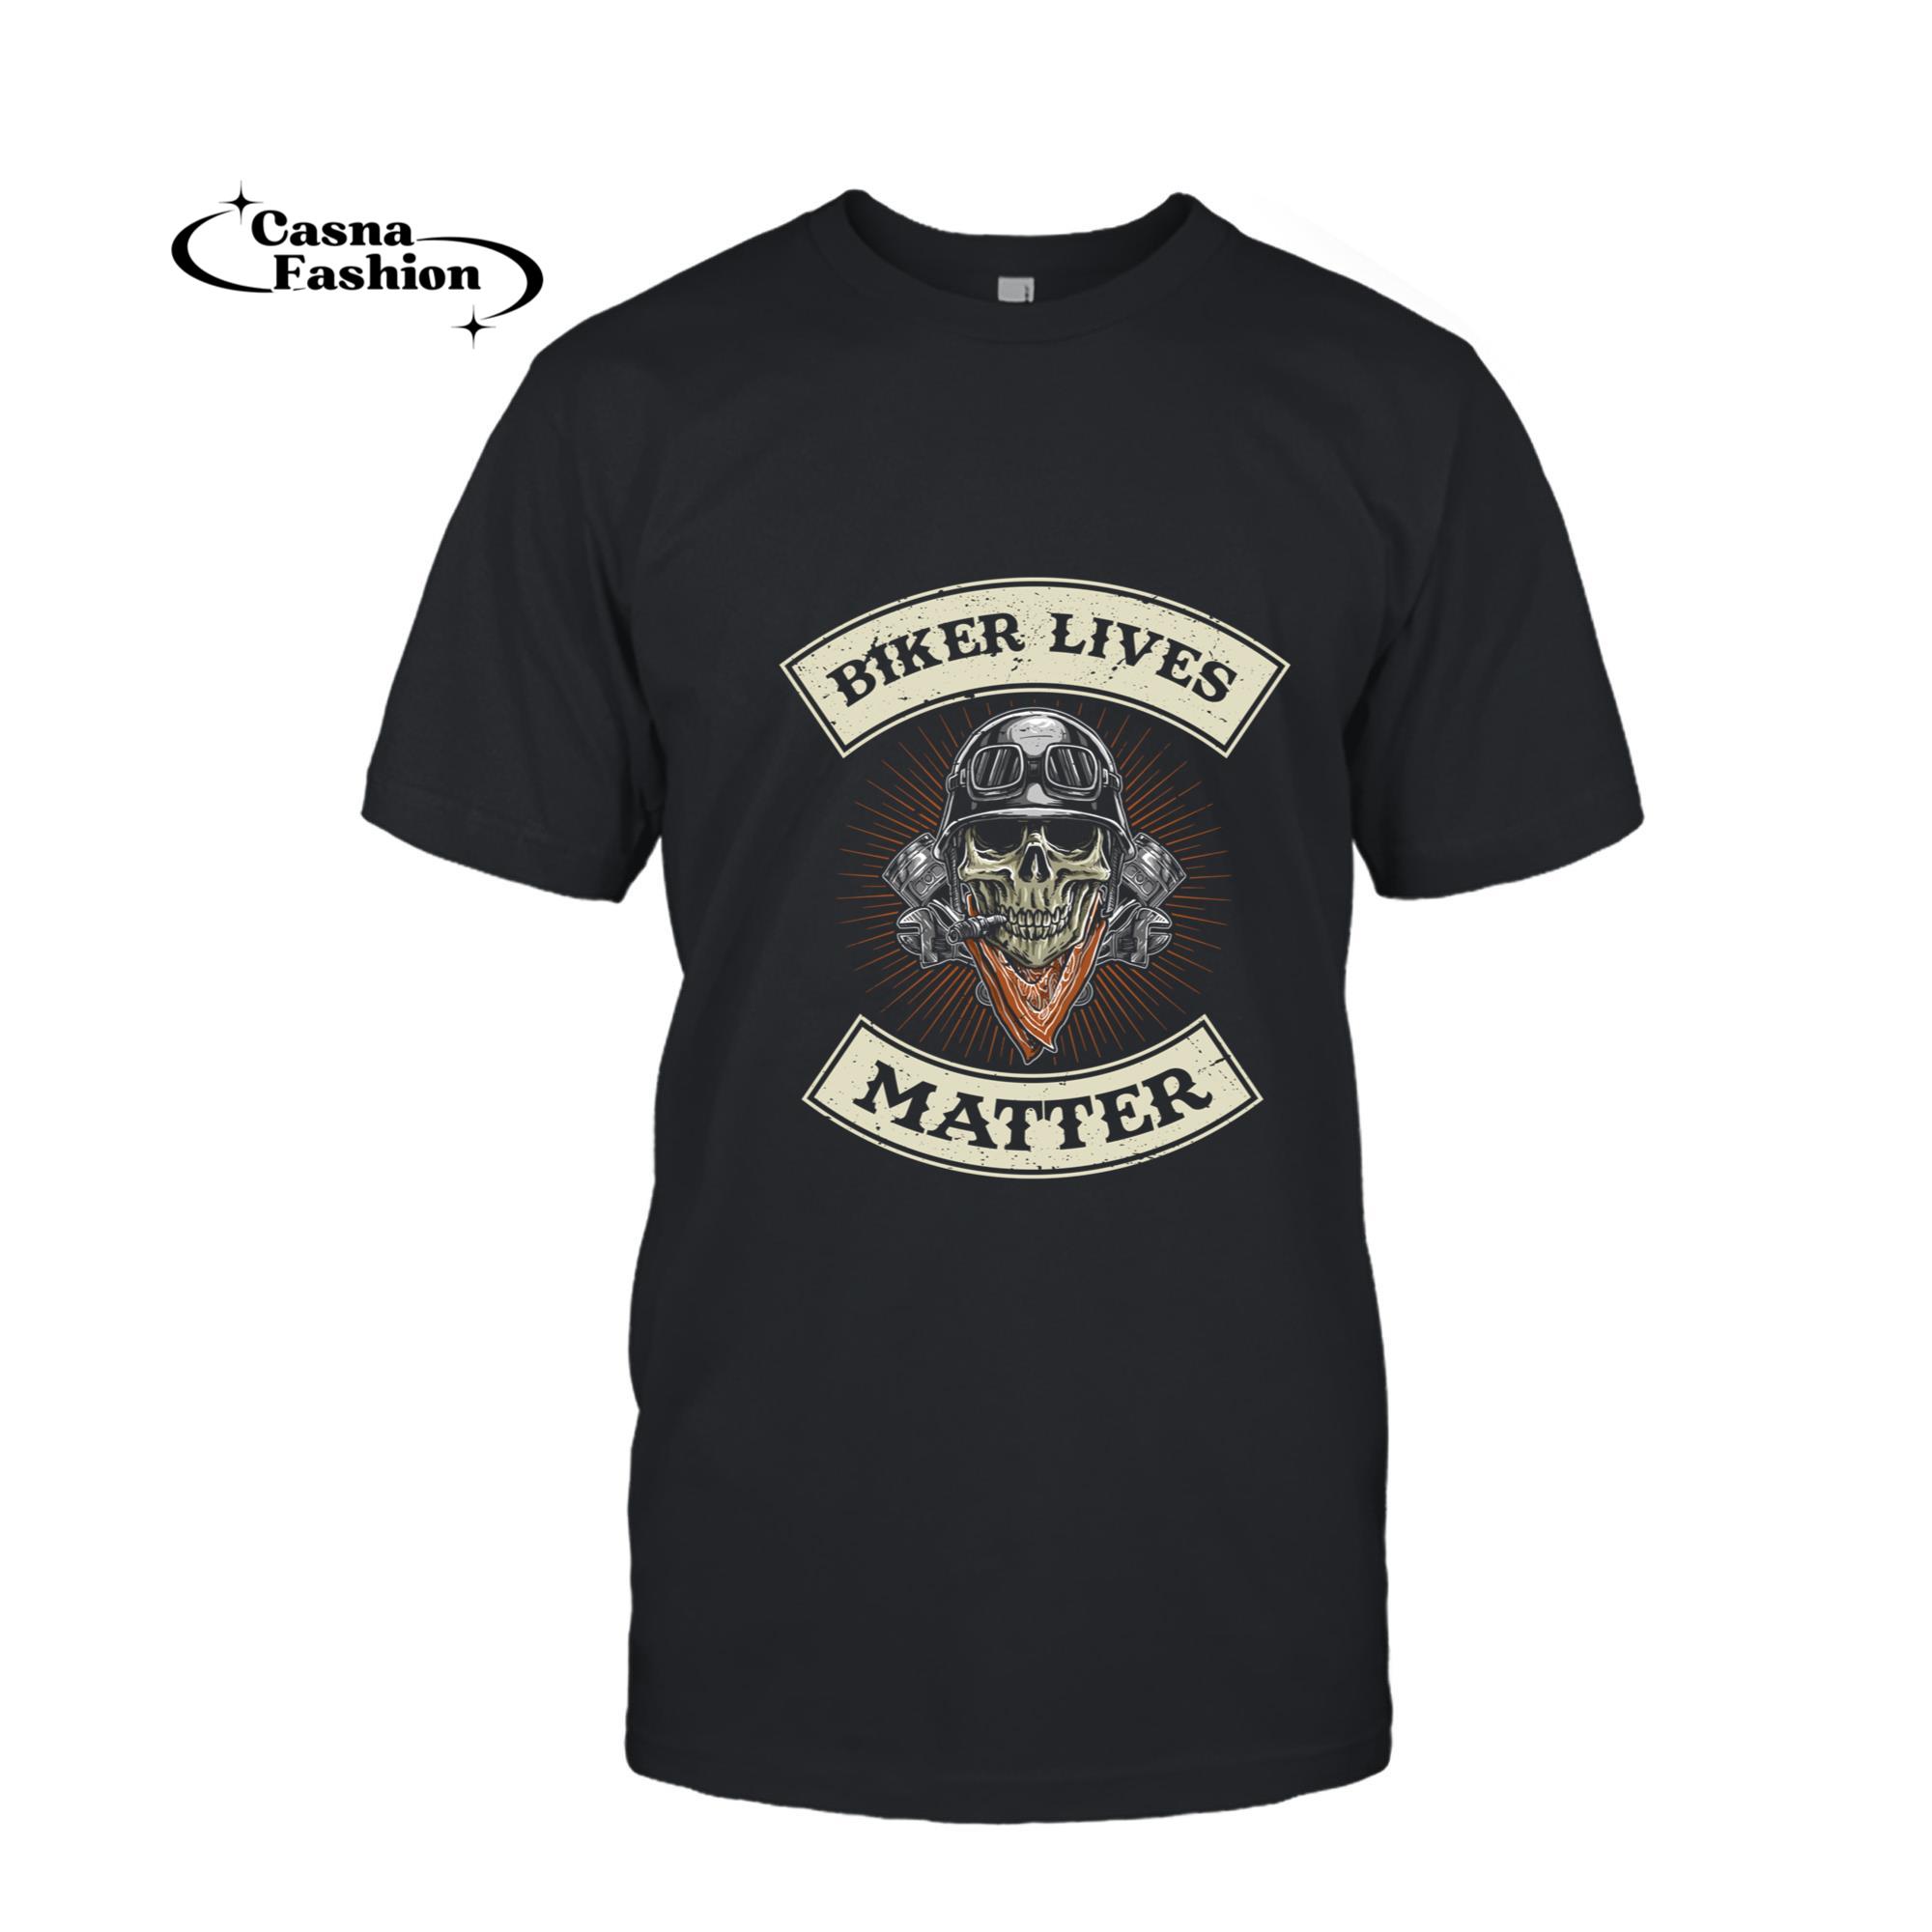 casnafashion_T-shirt_Biker Lives Matter Motorcycle Quotes Skull Flames Pullover Hoodie_T-shirt_Black